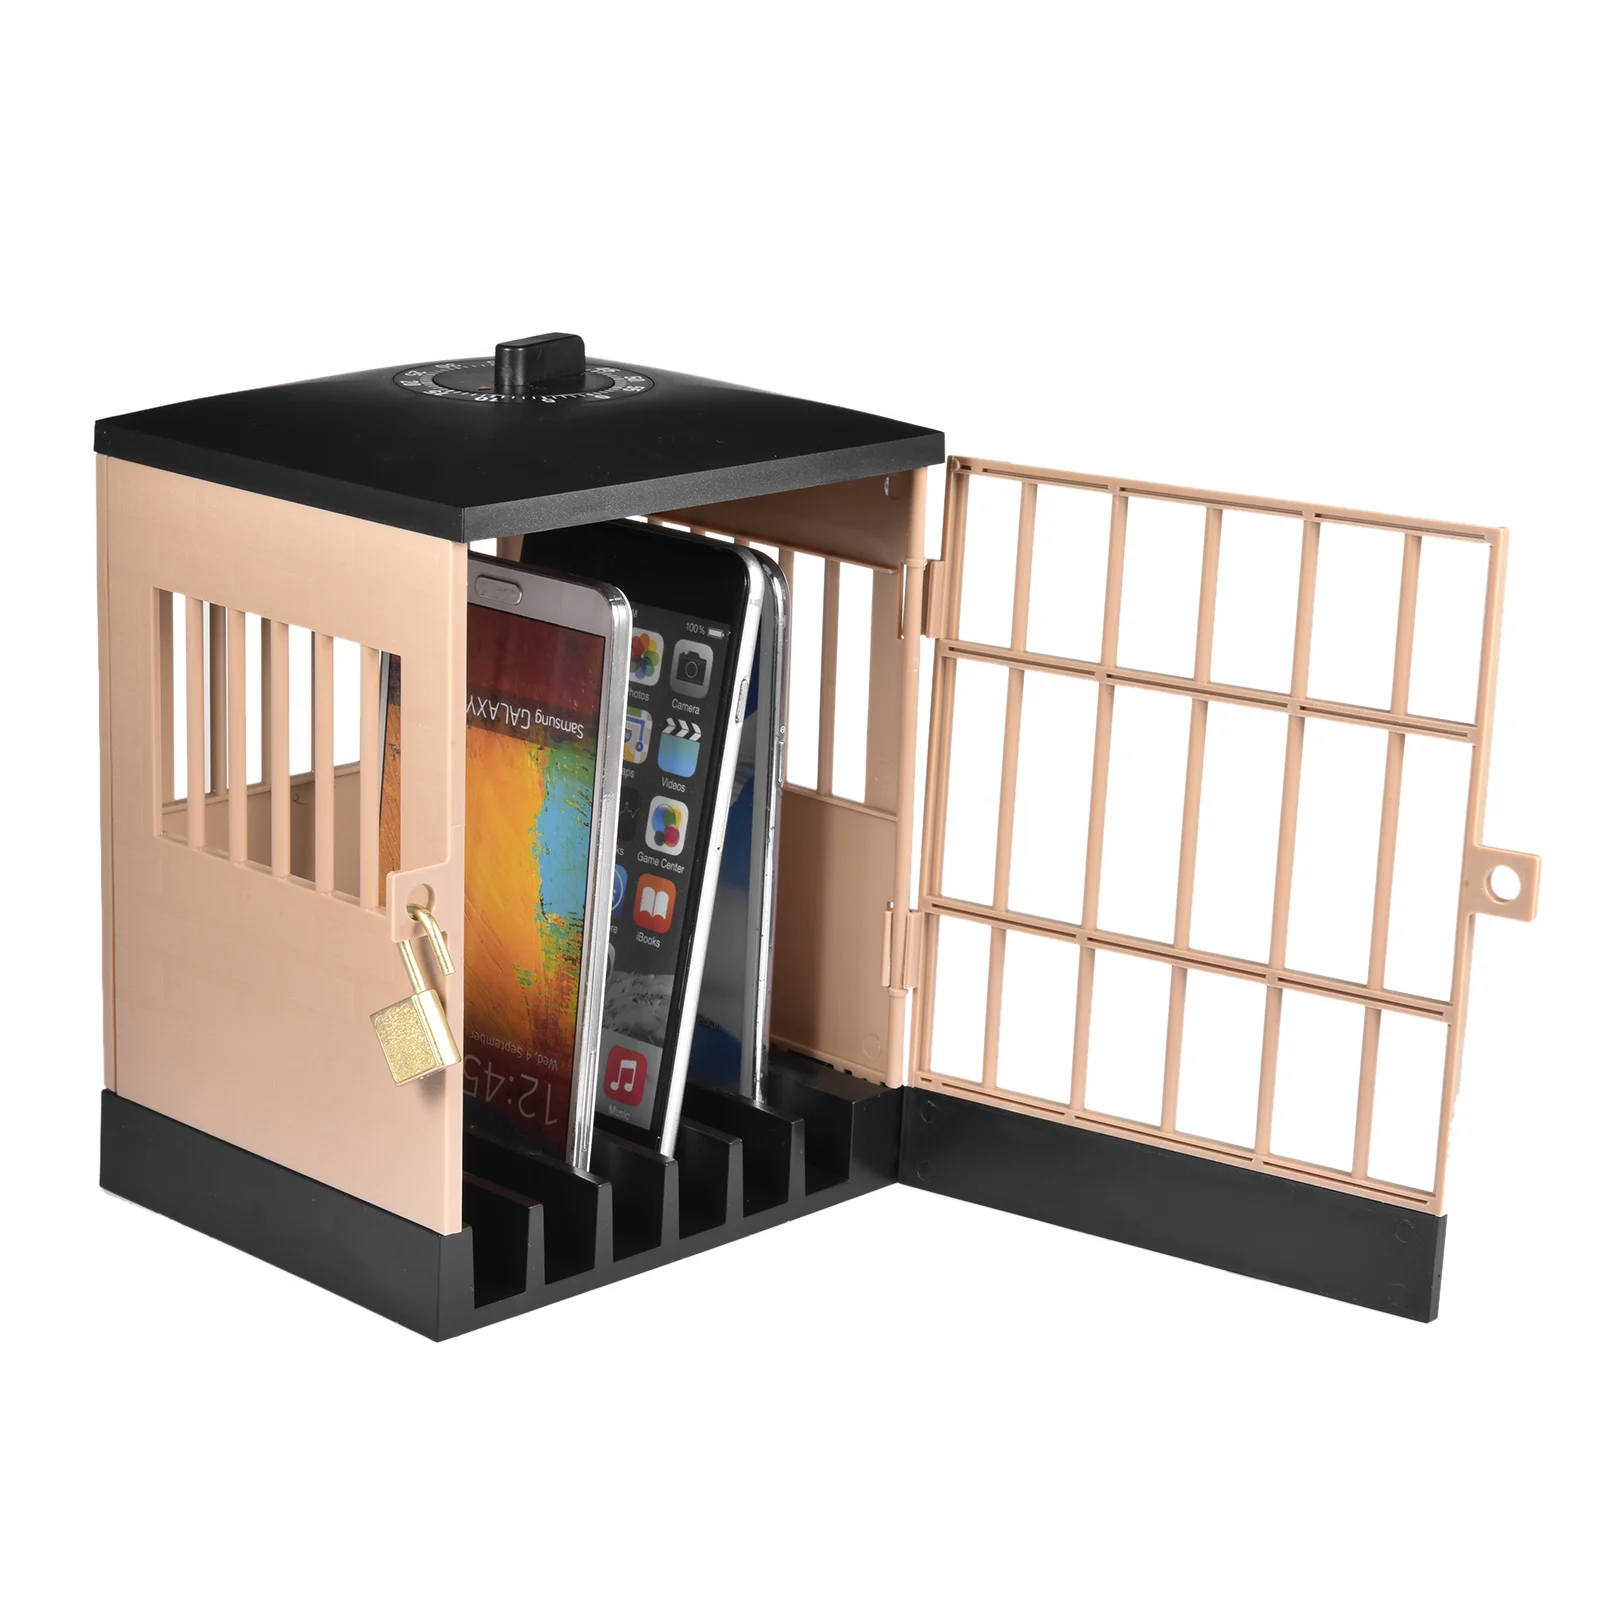 Mobile Phone Jail Cell Prison Lock Up Safe Smartphone Home Table Office Gadget Storage Organizer Organizador Cosmetic Organizers